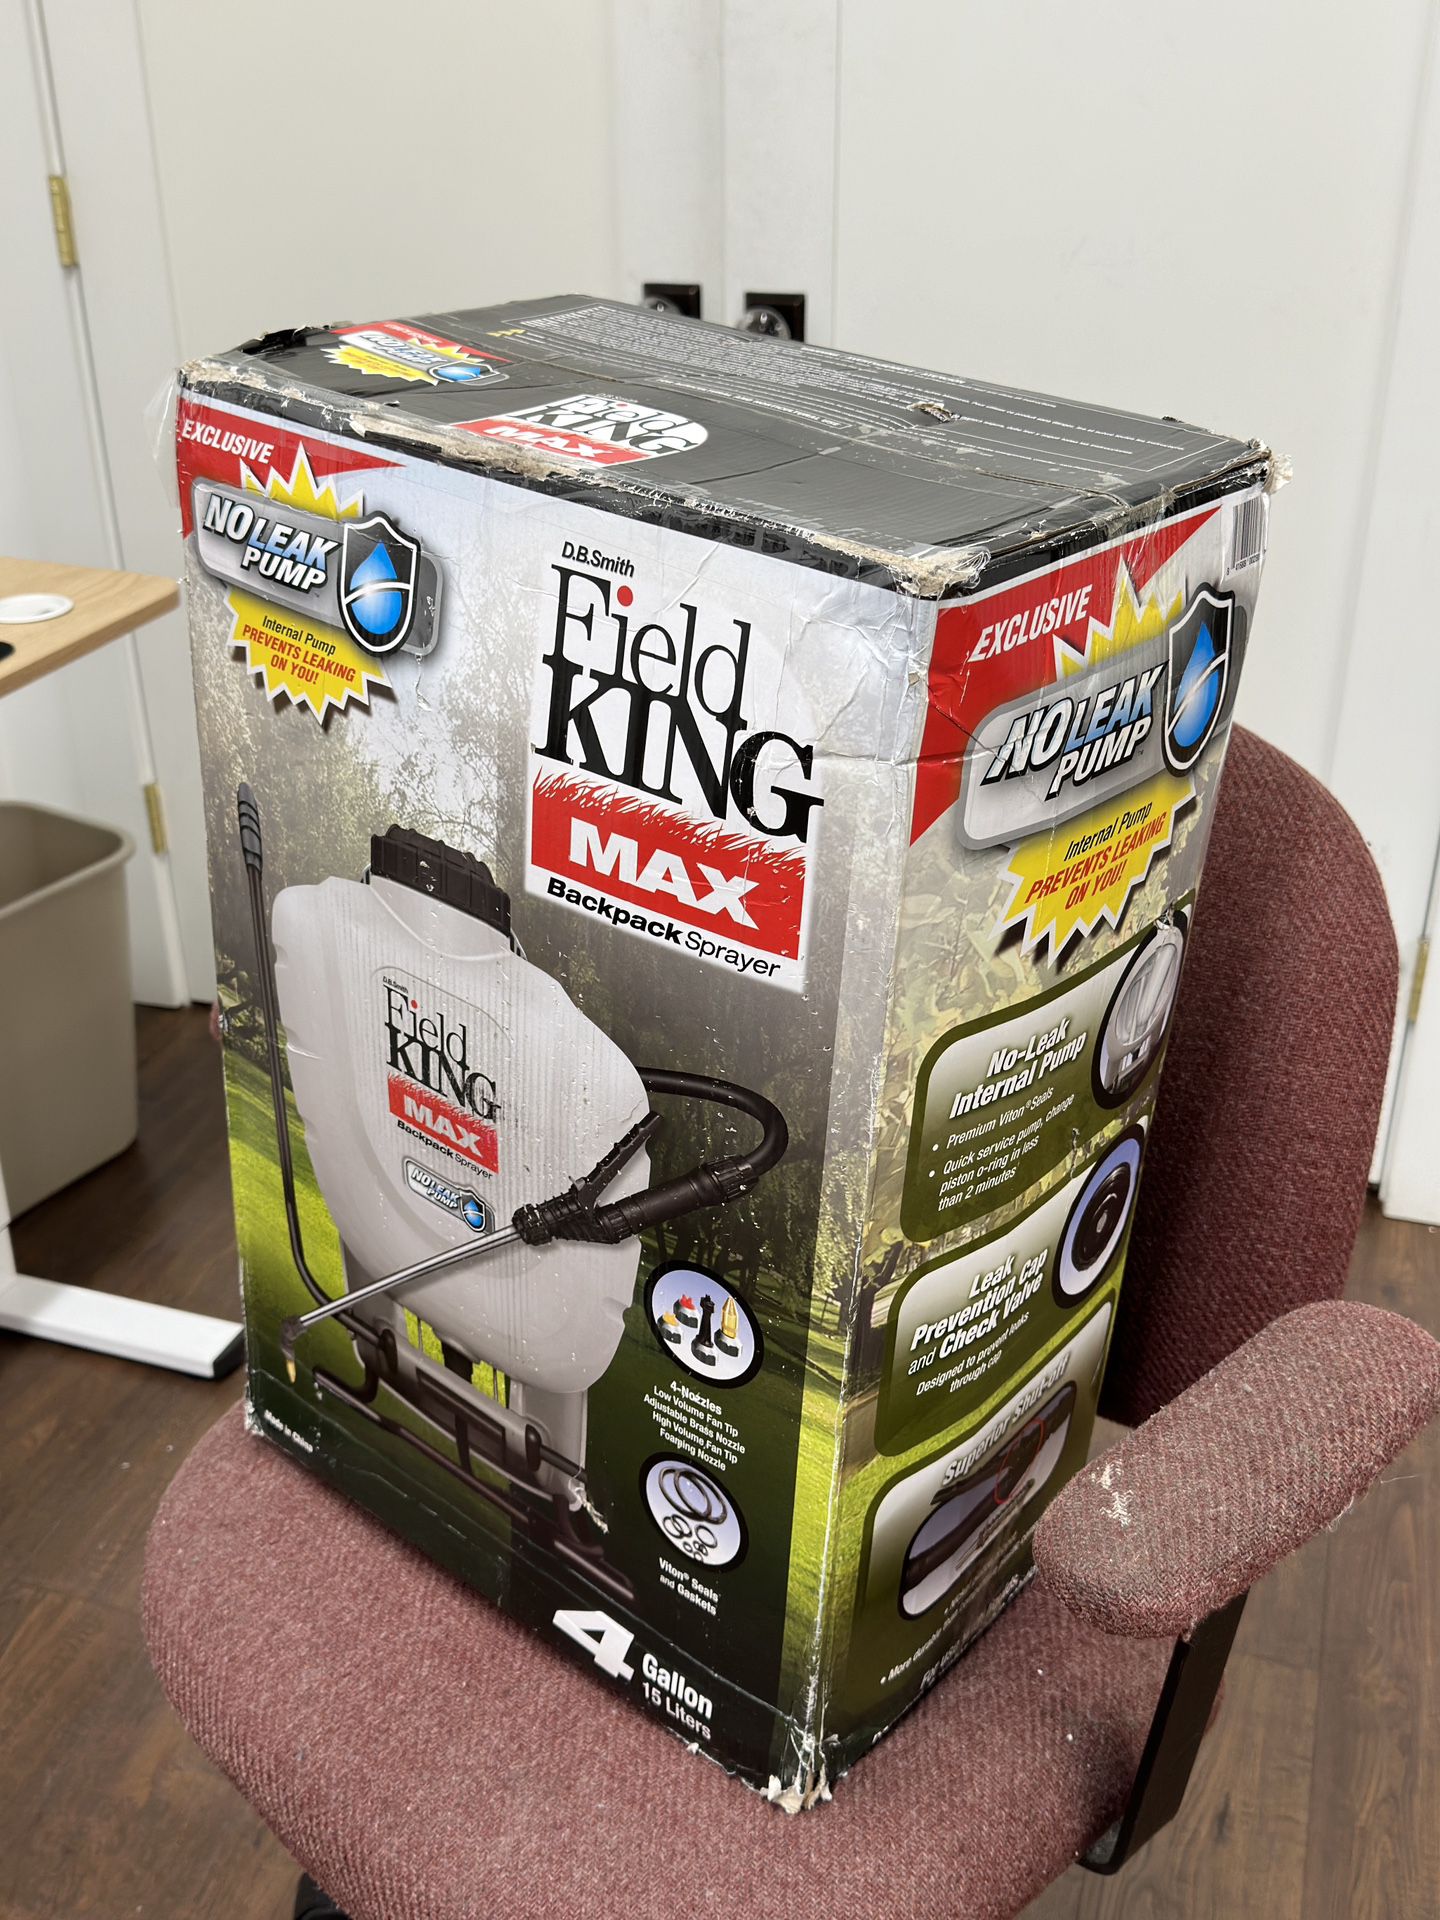 HOT DEAL Field King MAX 4 Gal. Backpack Sprayer For Professionals